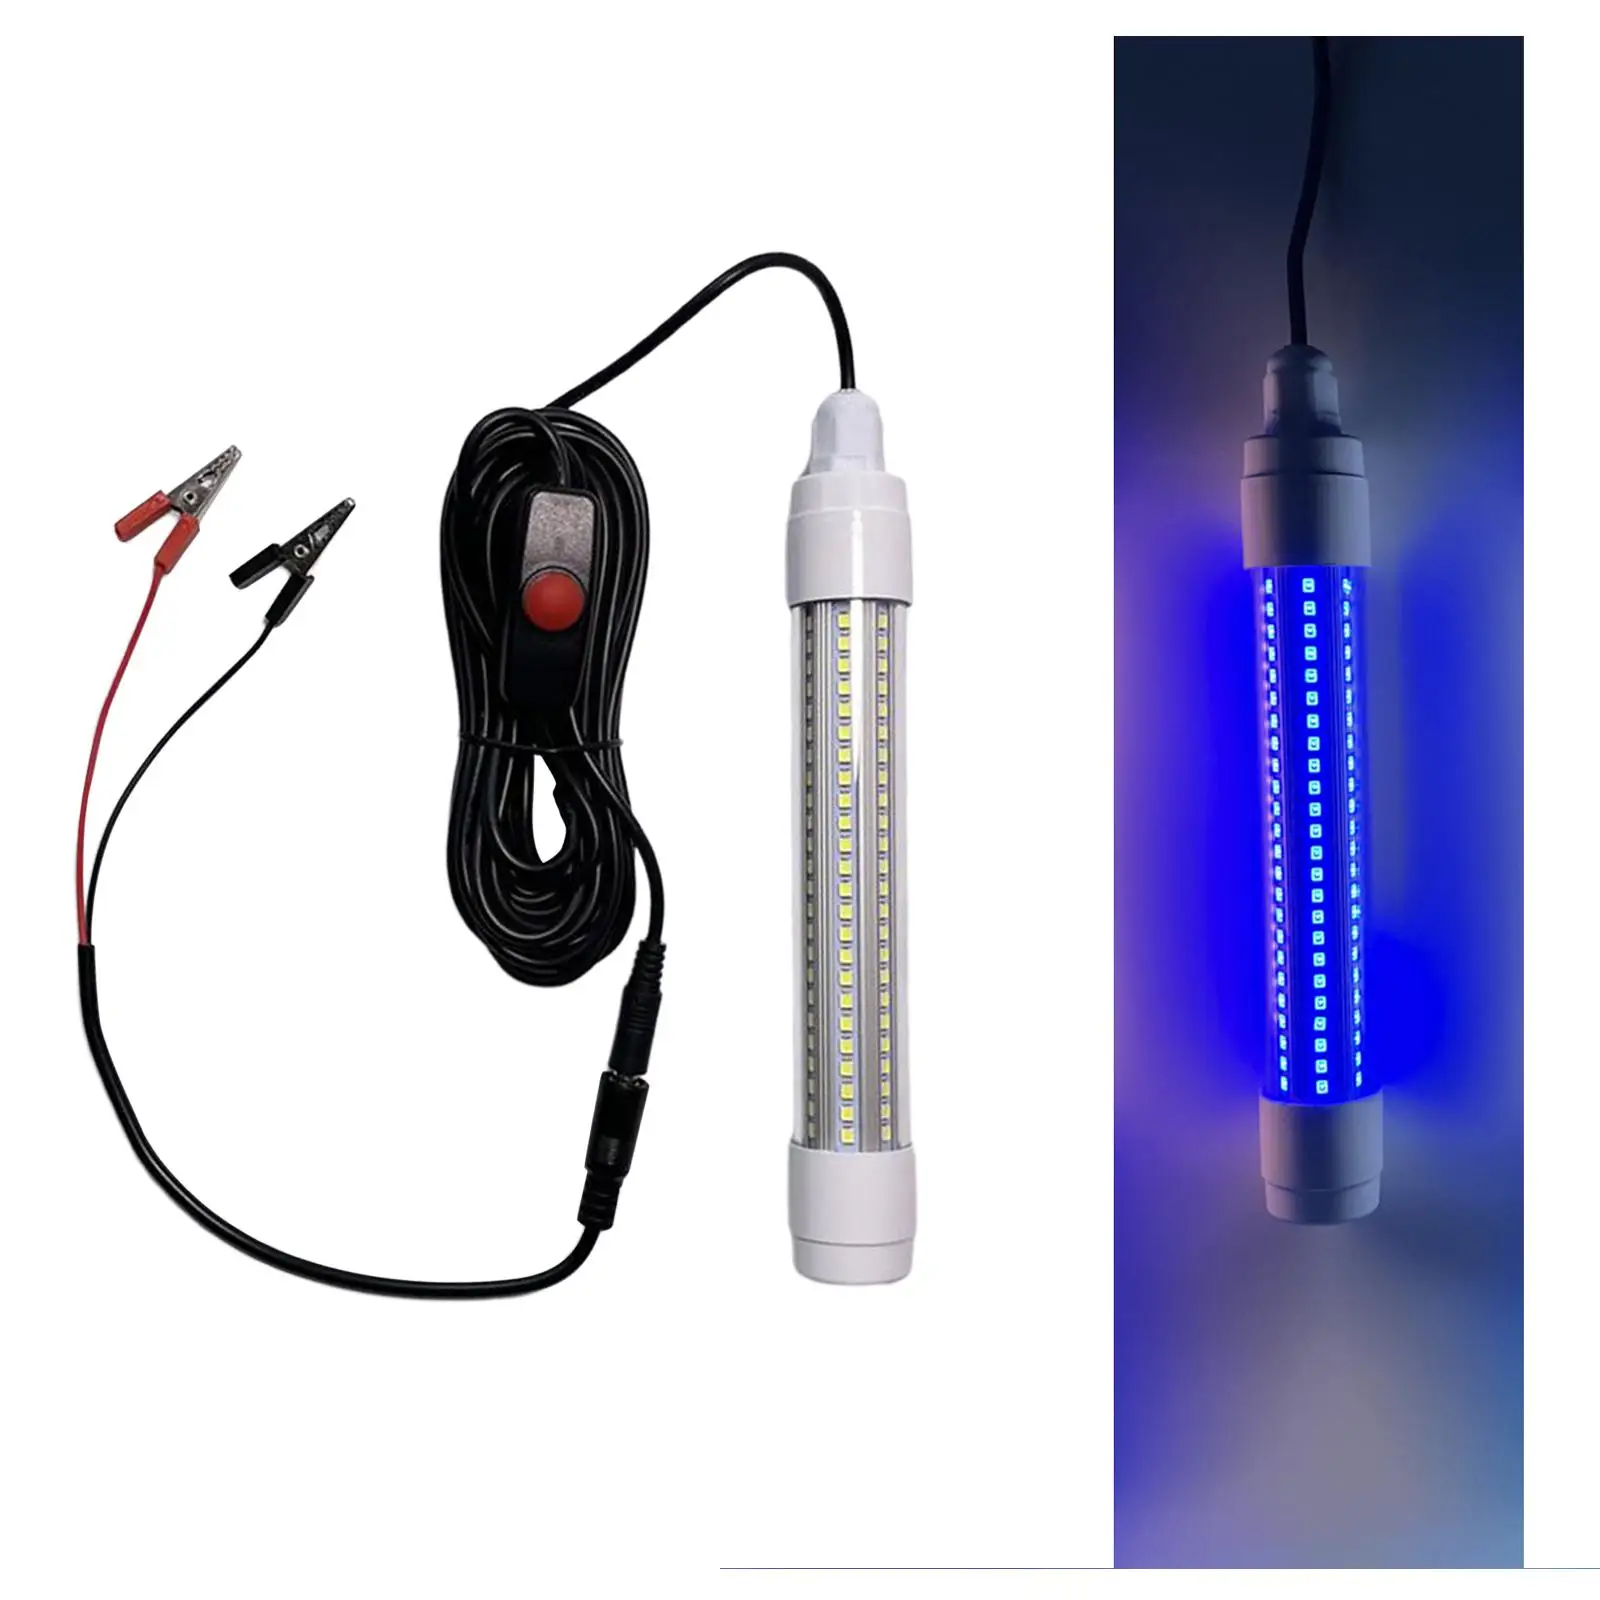 underwater boat lights 12V Fishing Light Lamps Submersible Underwater with 5M Cord 144LED for Shad Squid Squid Lure Attract Boat Accessories underwater lights